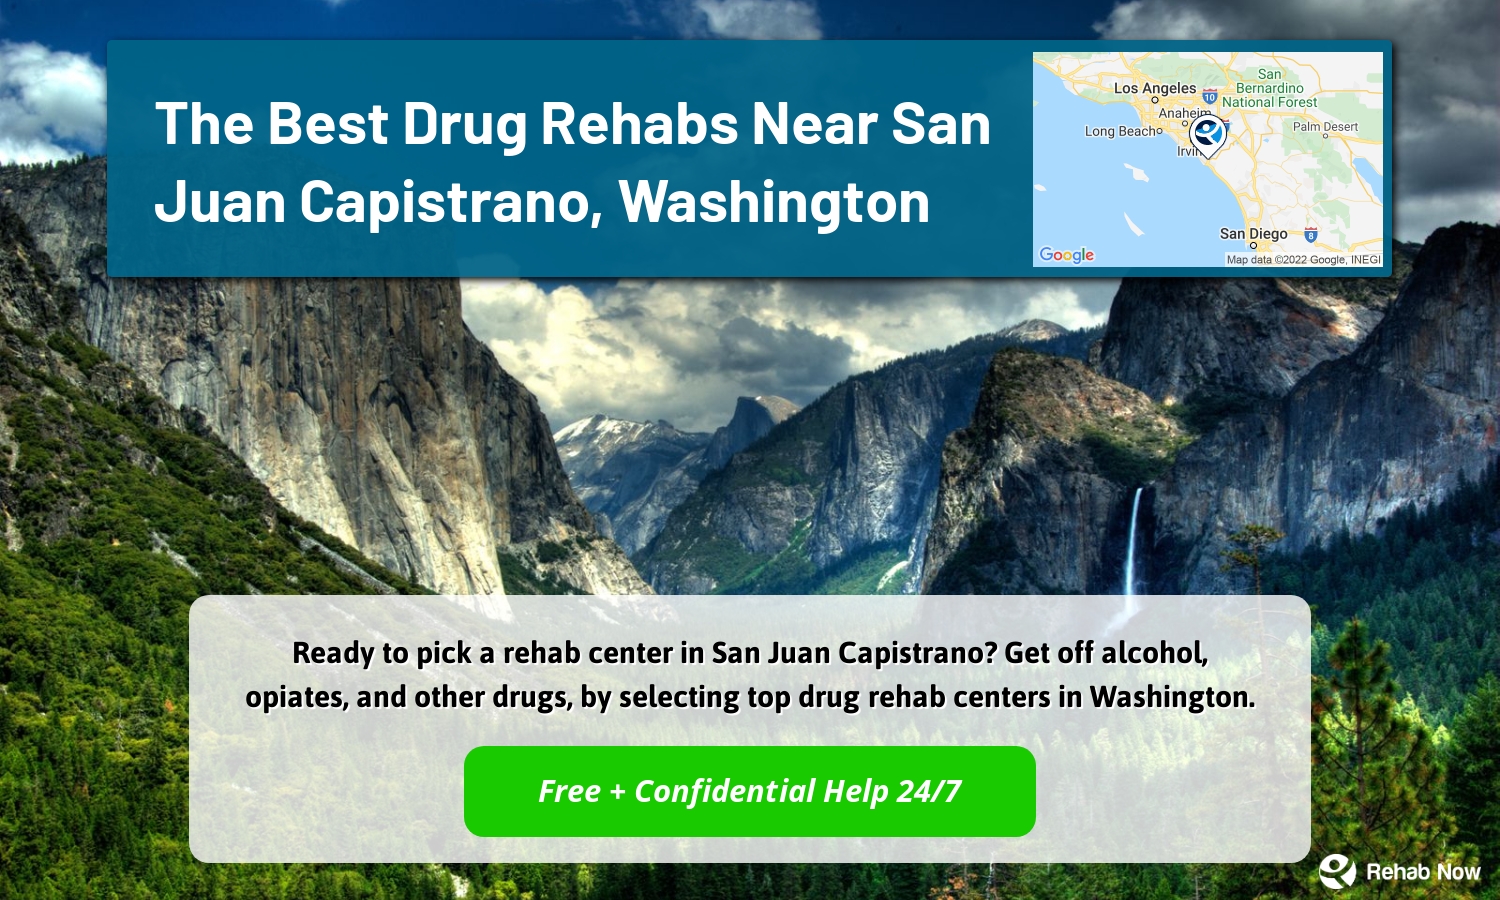 Ready to pick a rehab center in San Juan Capistrano? Get off alcohol, opiates, and other drugs, by selecting top drug rehab centers in Washington.